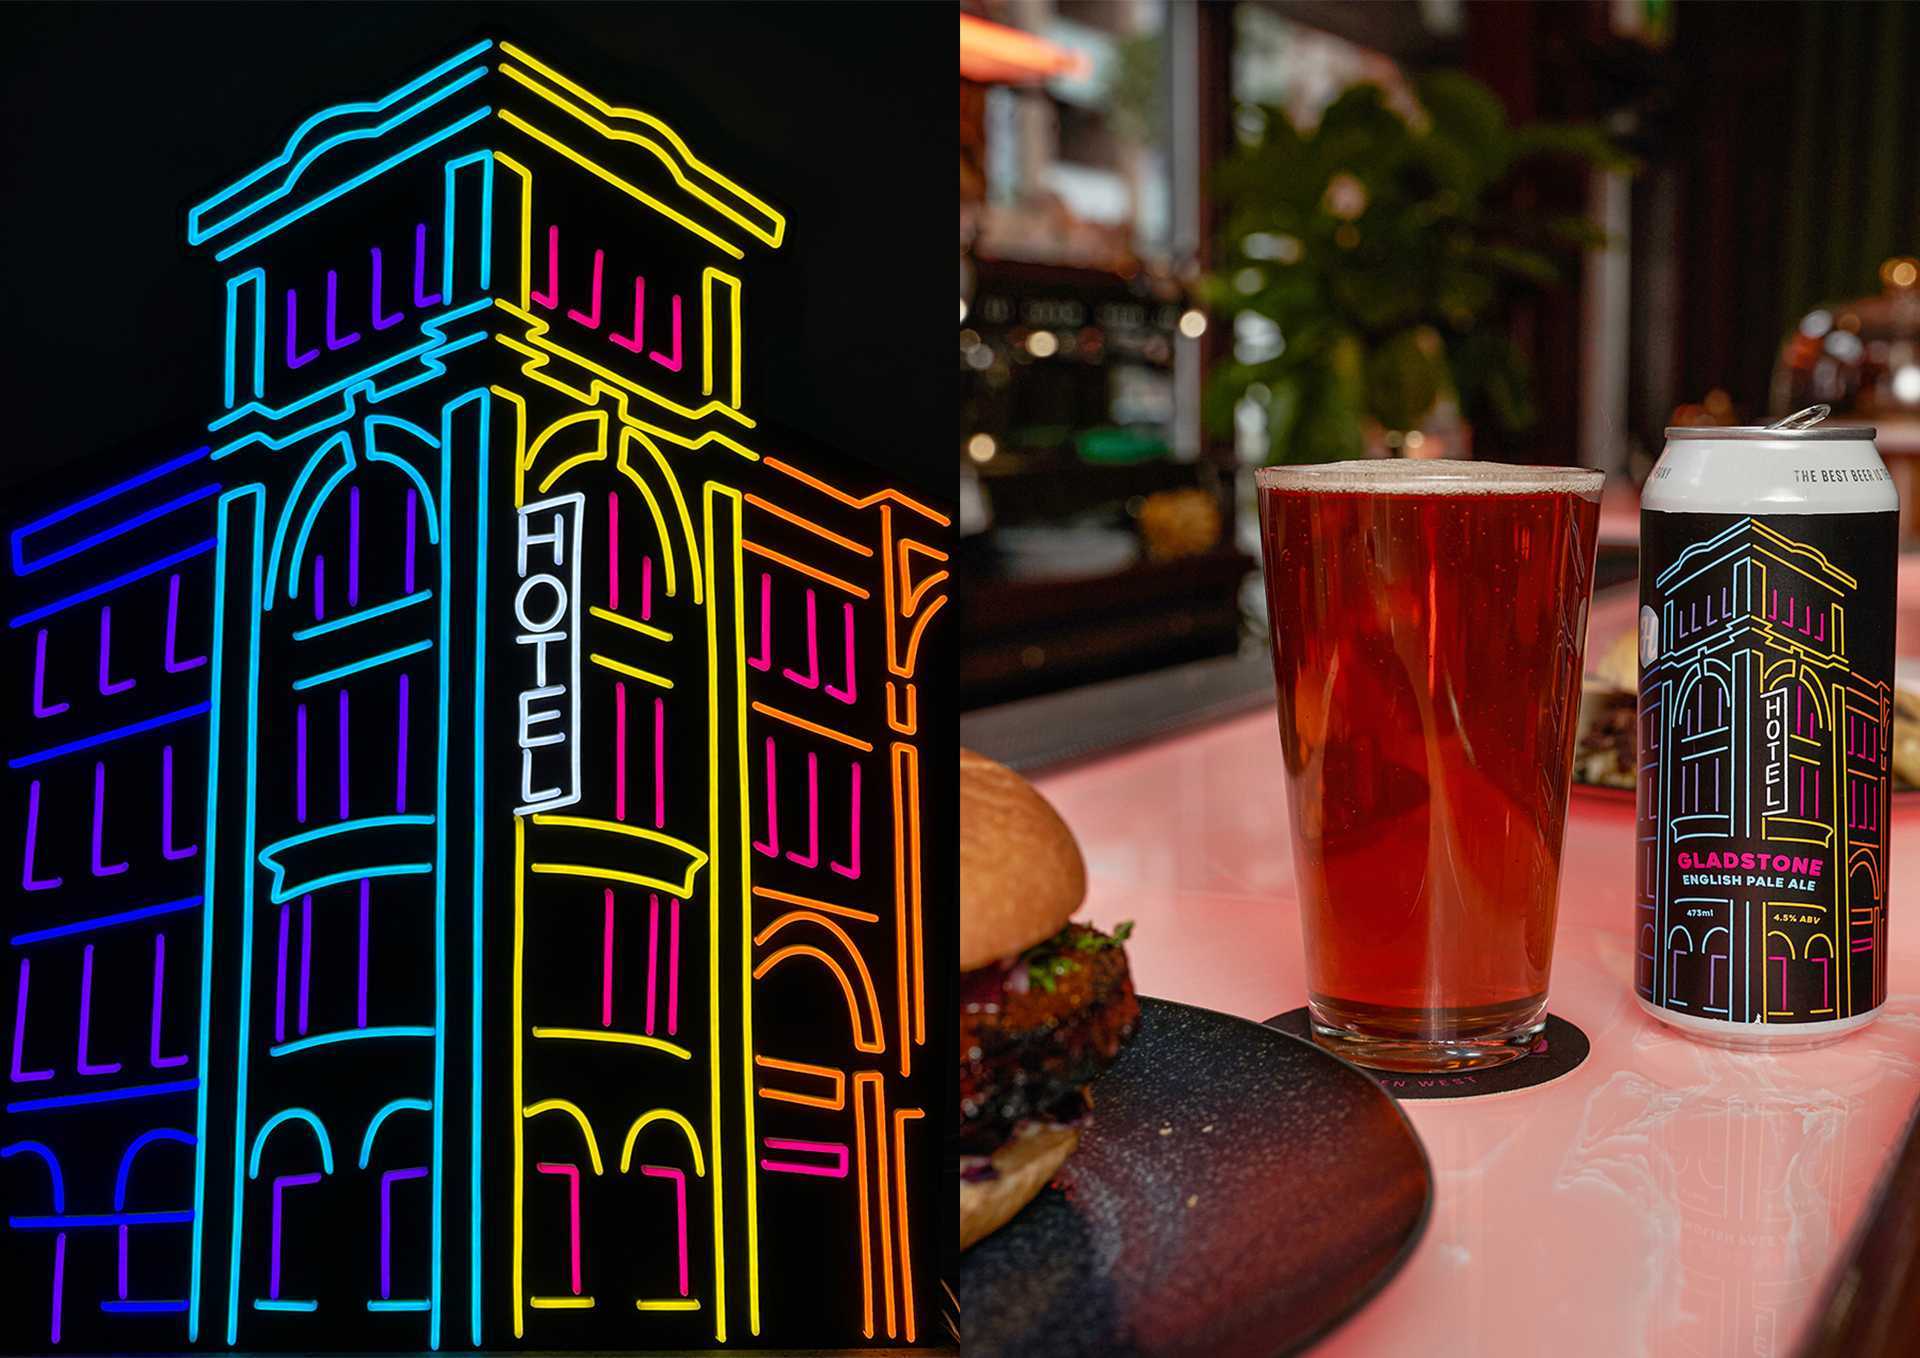 Gladstone House | Kal Honey's neon art piece is featured on the cans of Gladstone English Pale Ale